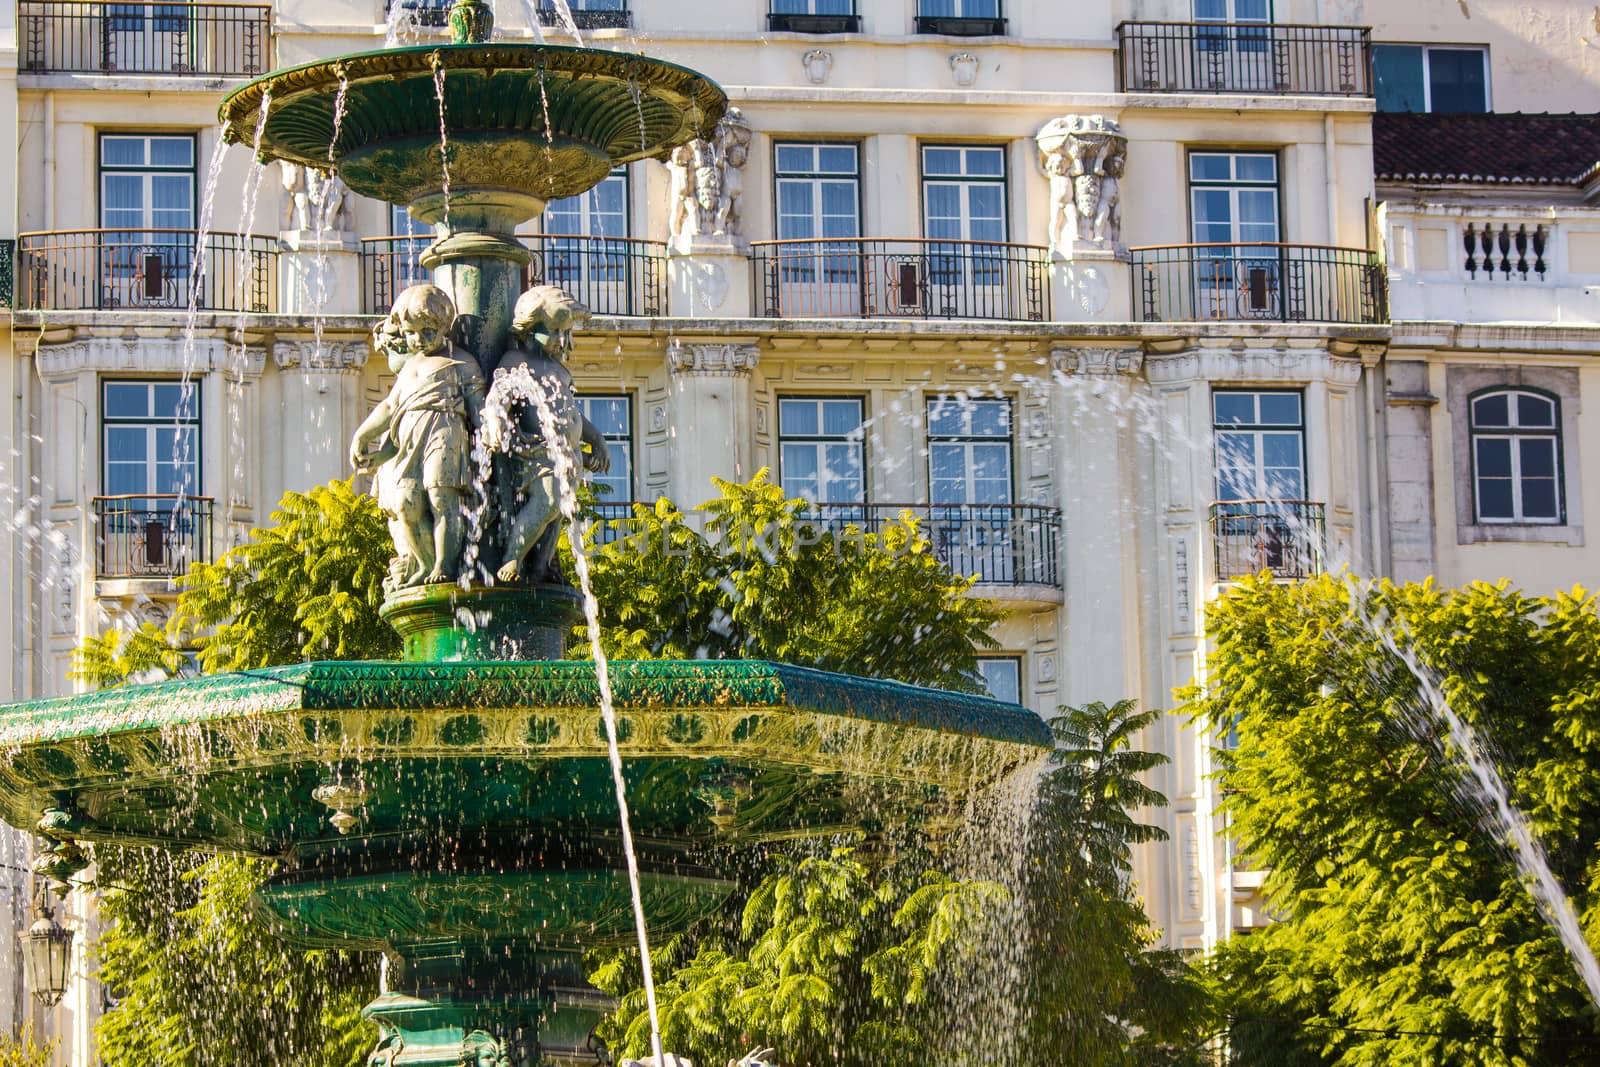 fountain at Rossio square in Lisbon, Portugal by 1shostak